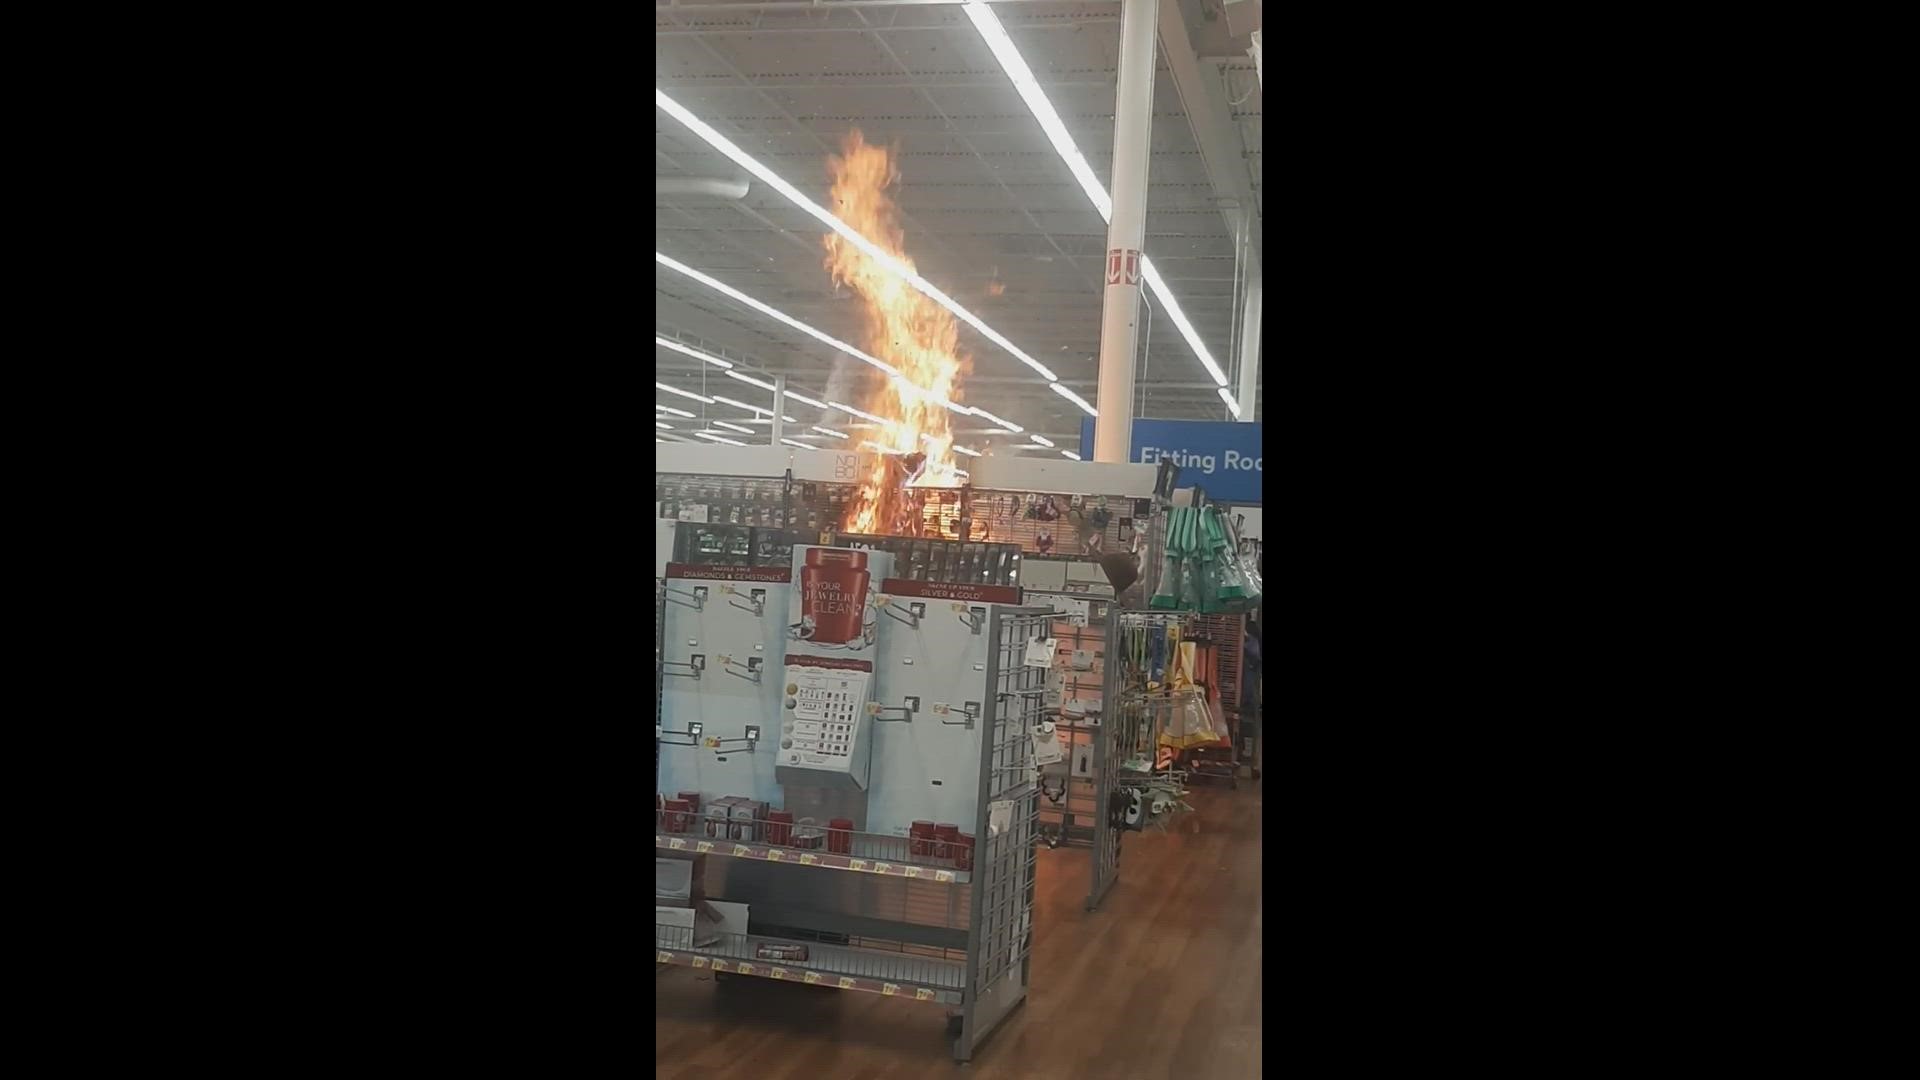 Hollywood Walmart remains closed after suspected arson